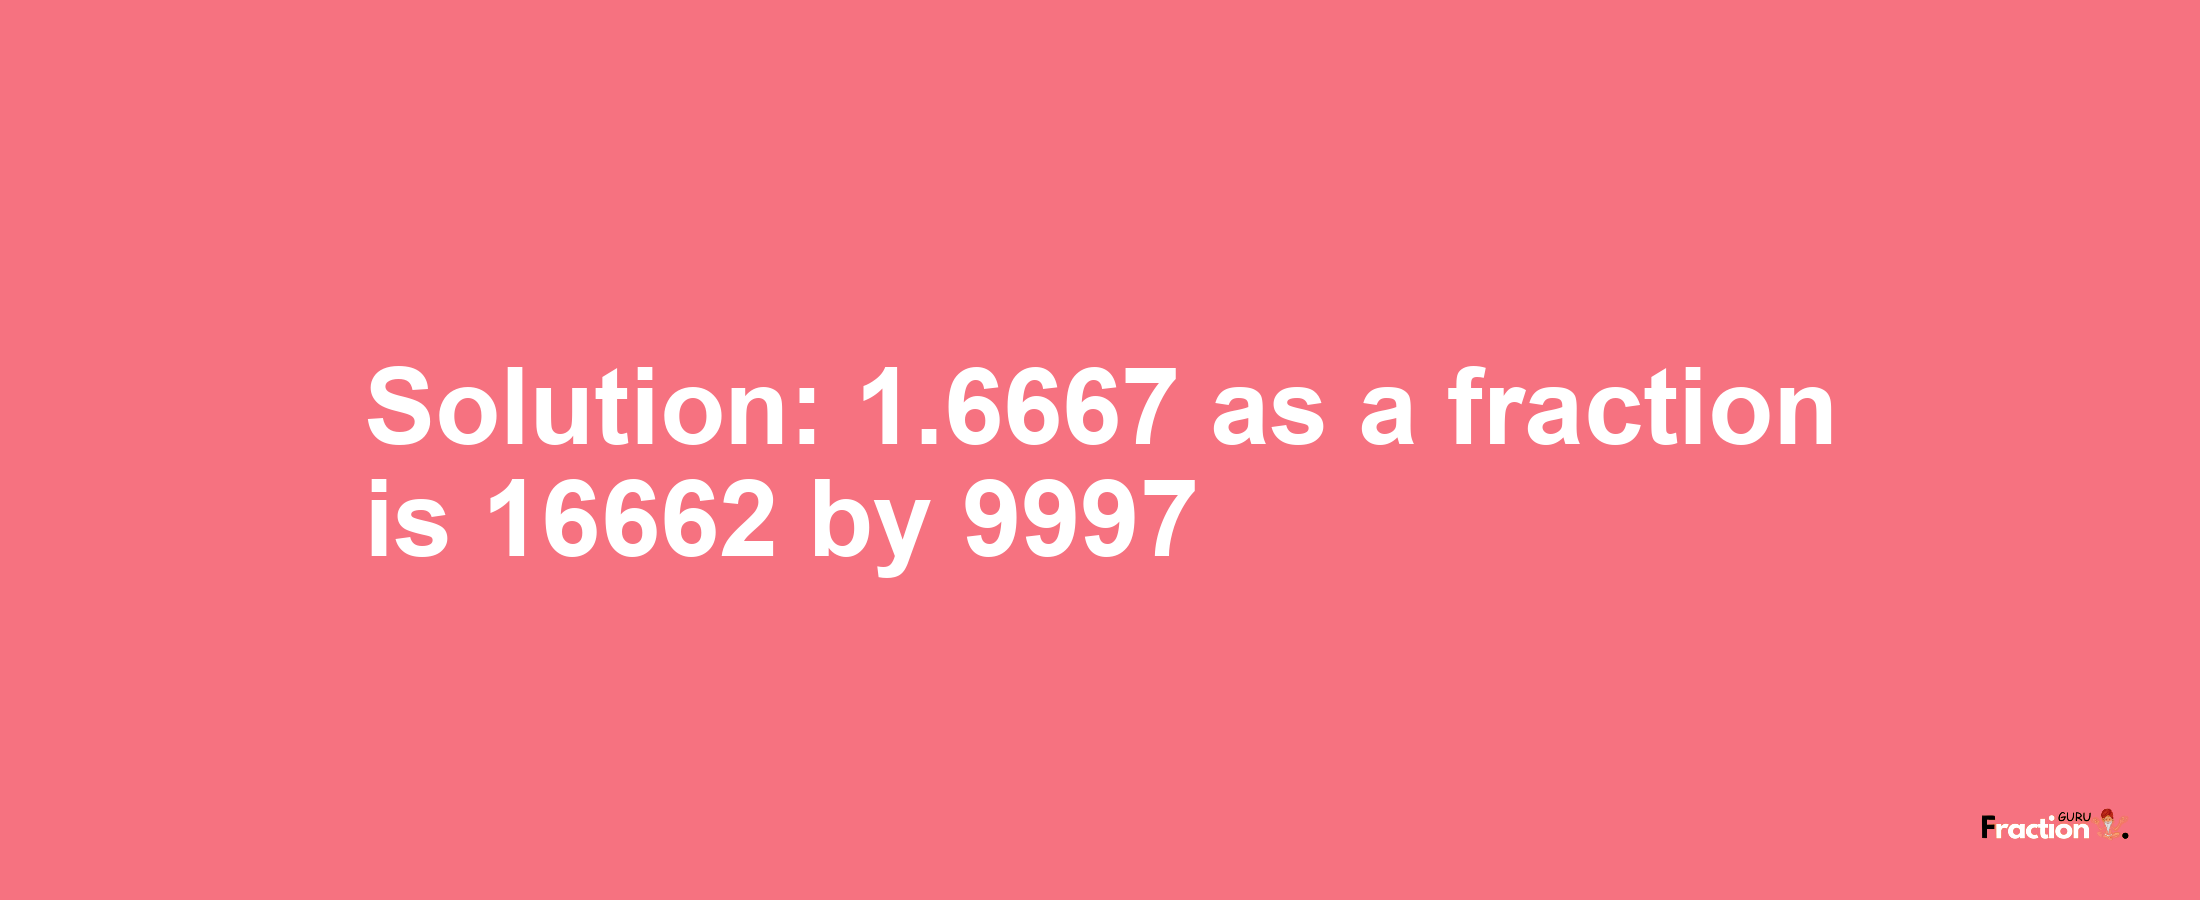 Solution:1.6667 as a fraction is 16662/9997